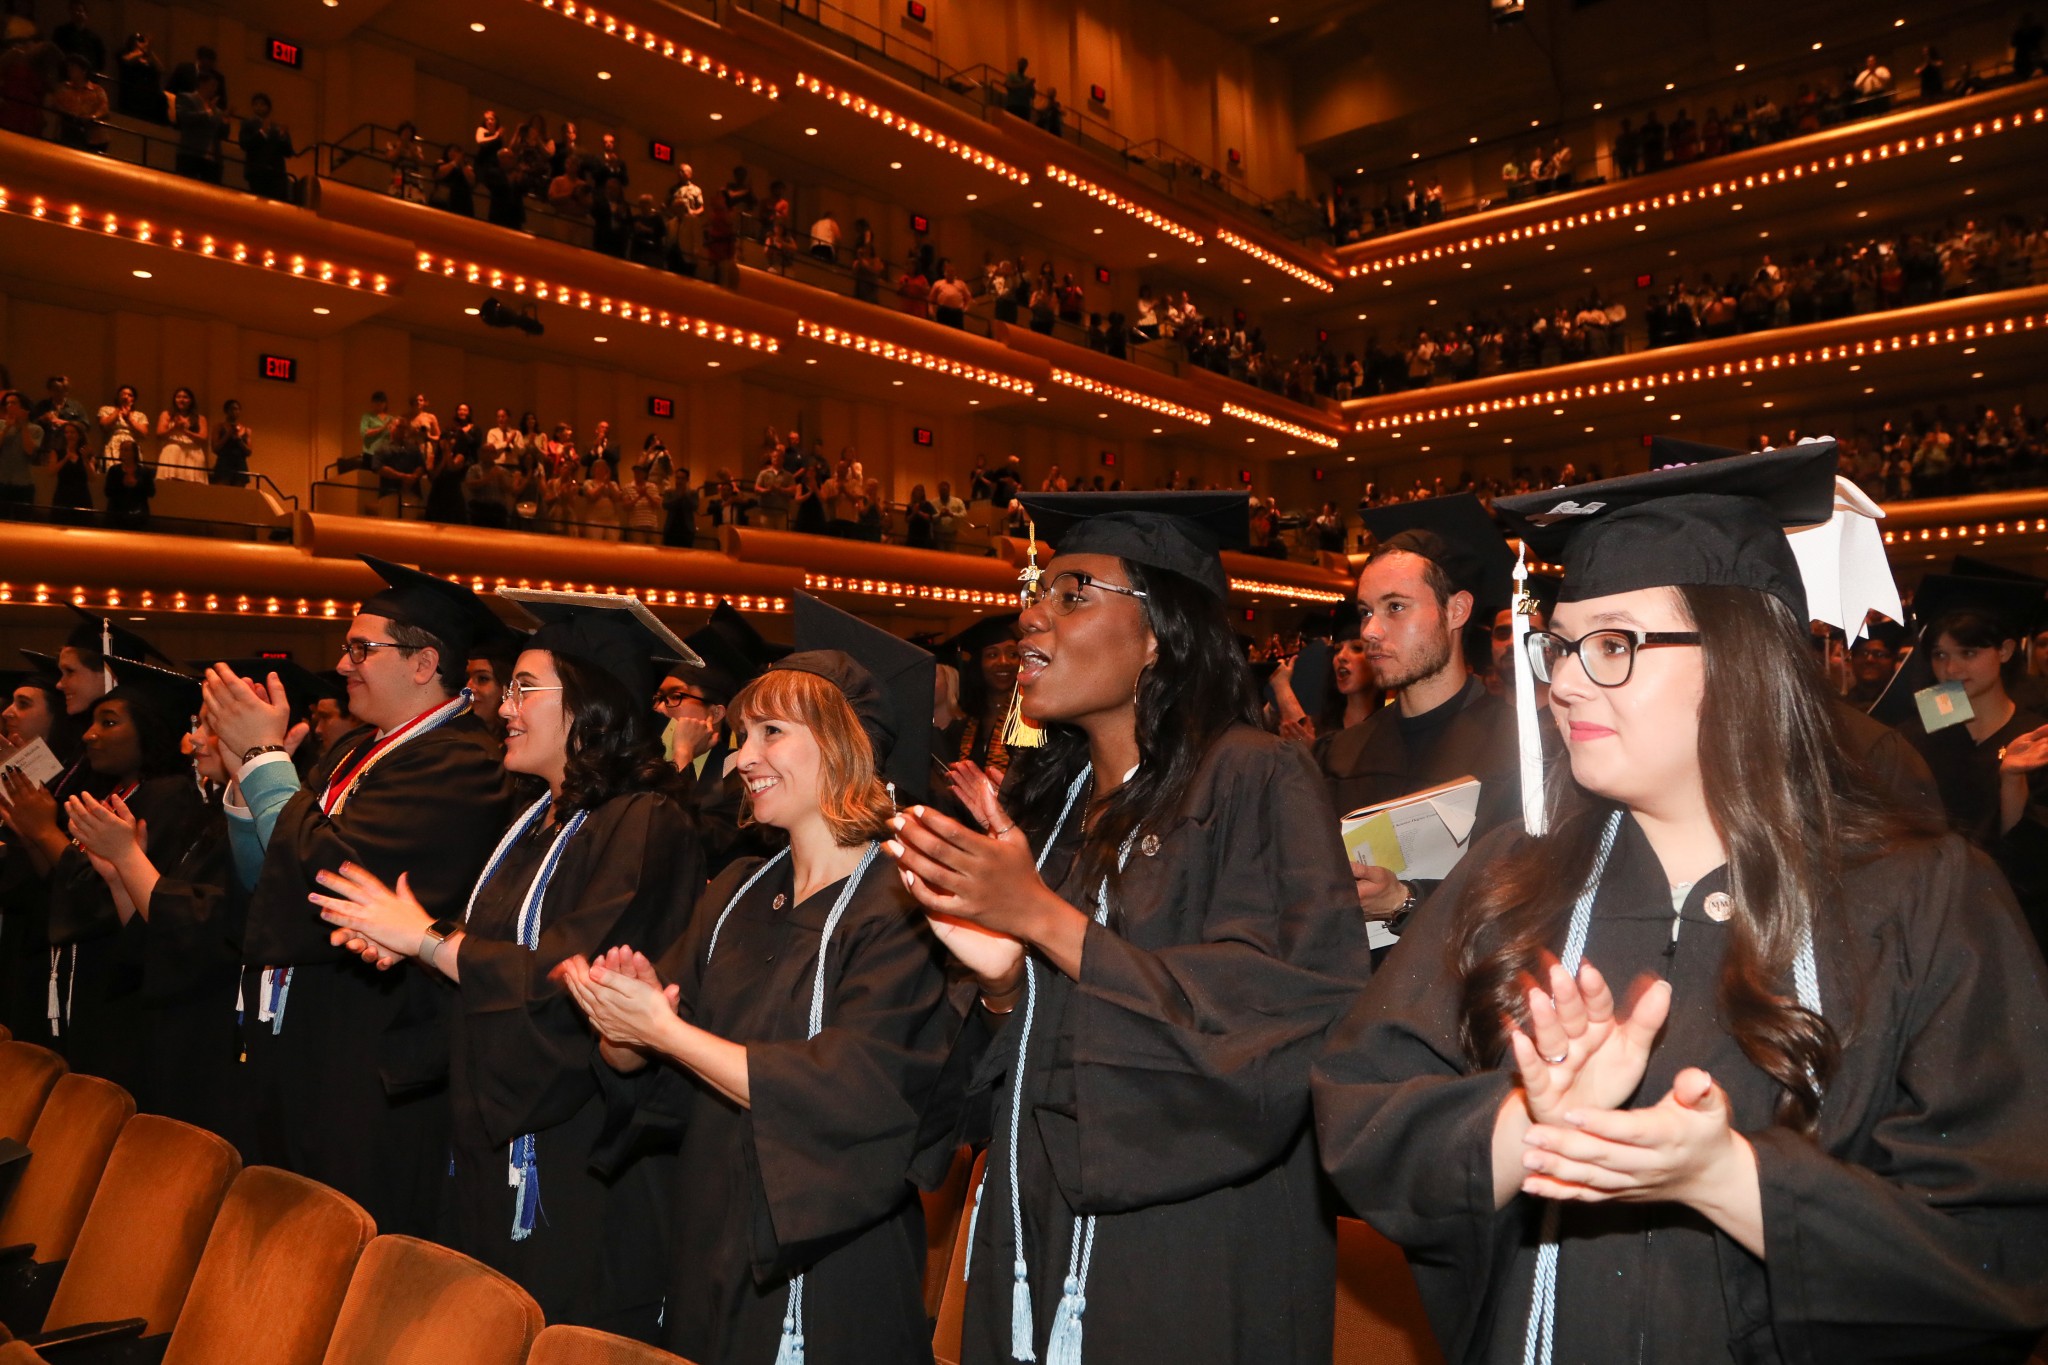 Students applauding for someone being honored at Commencement 2017